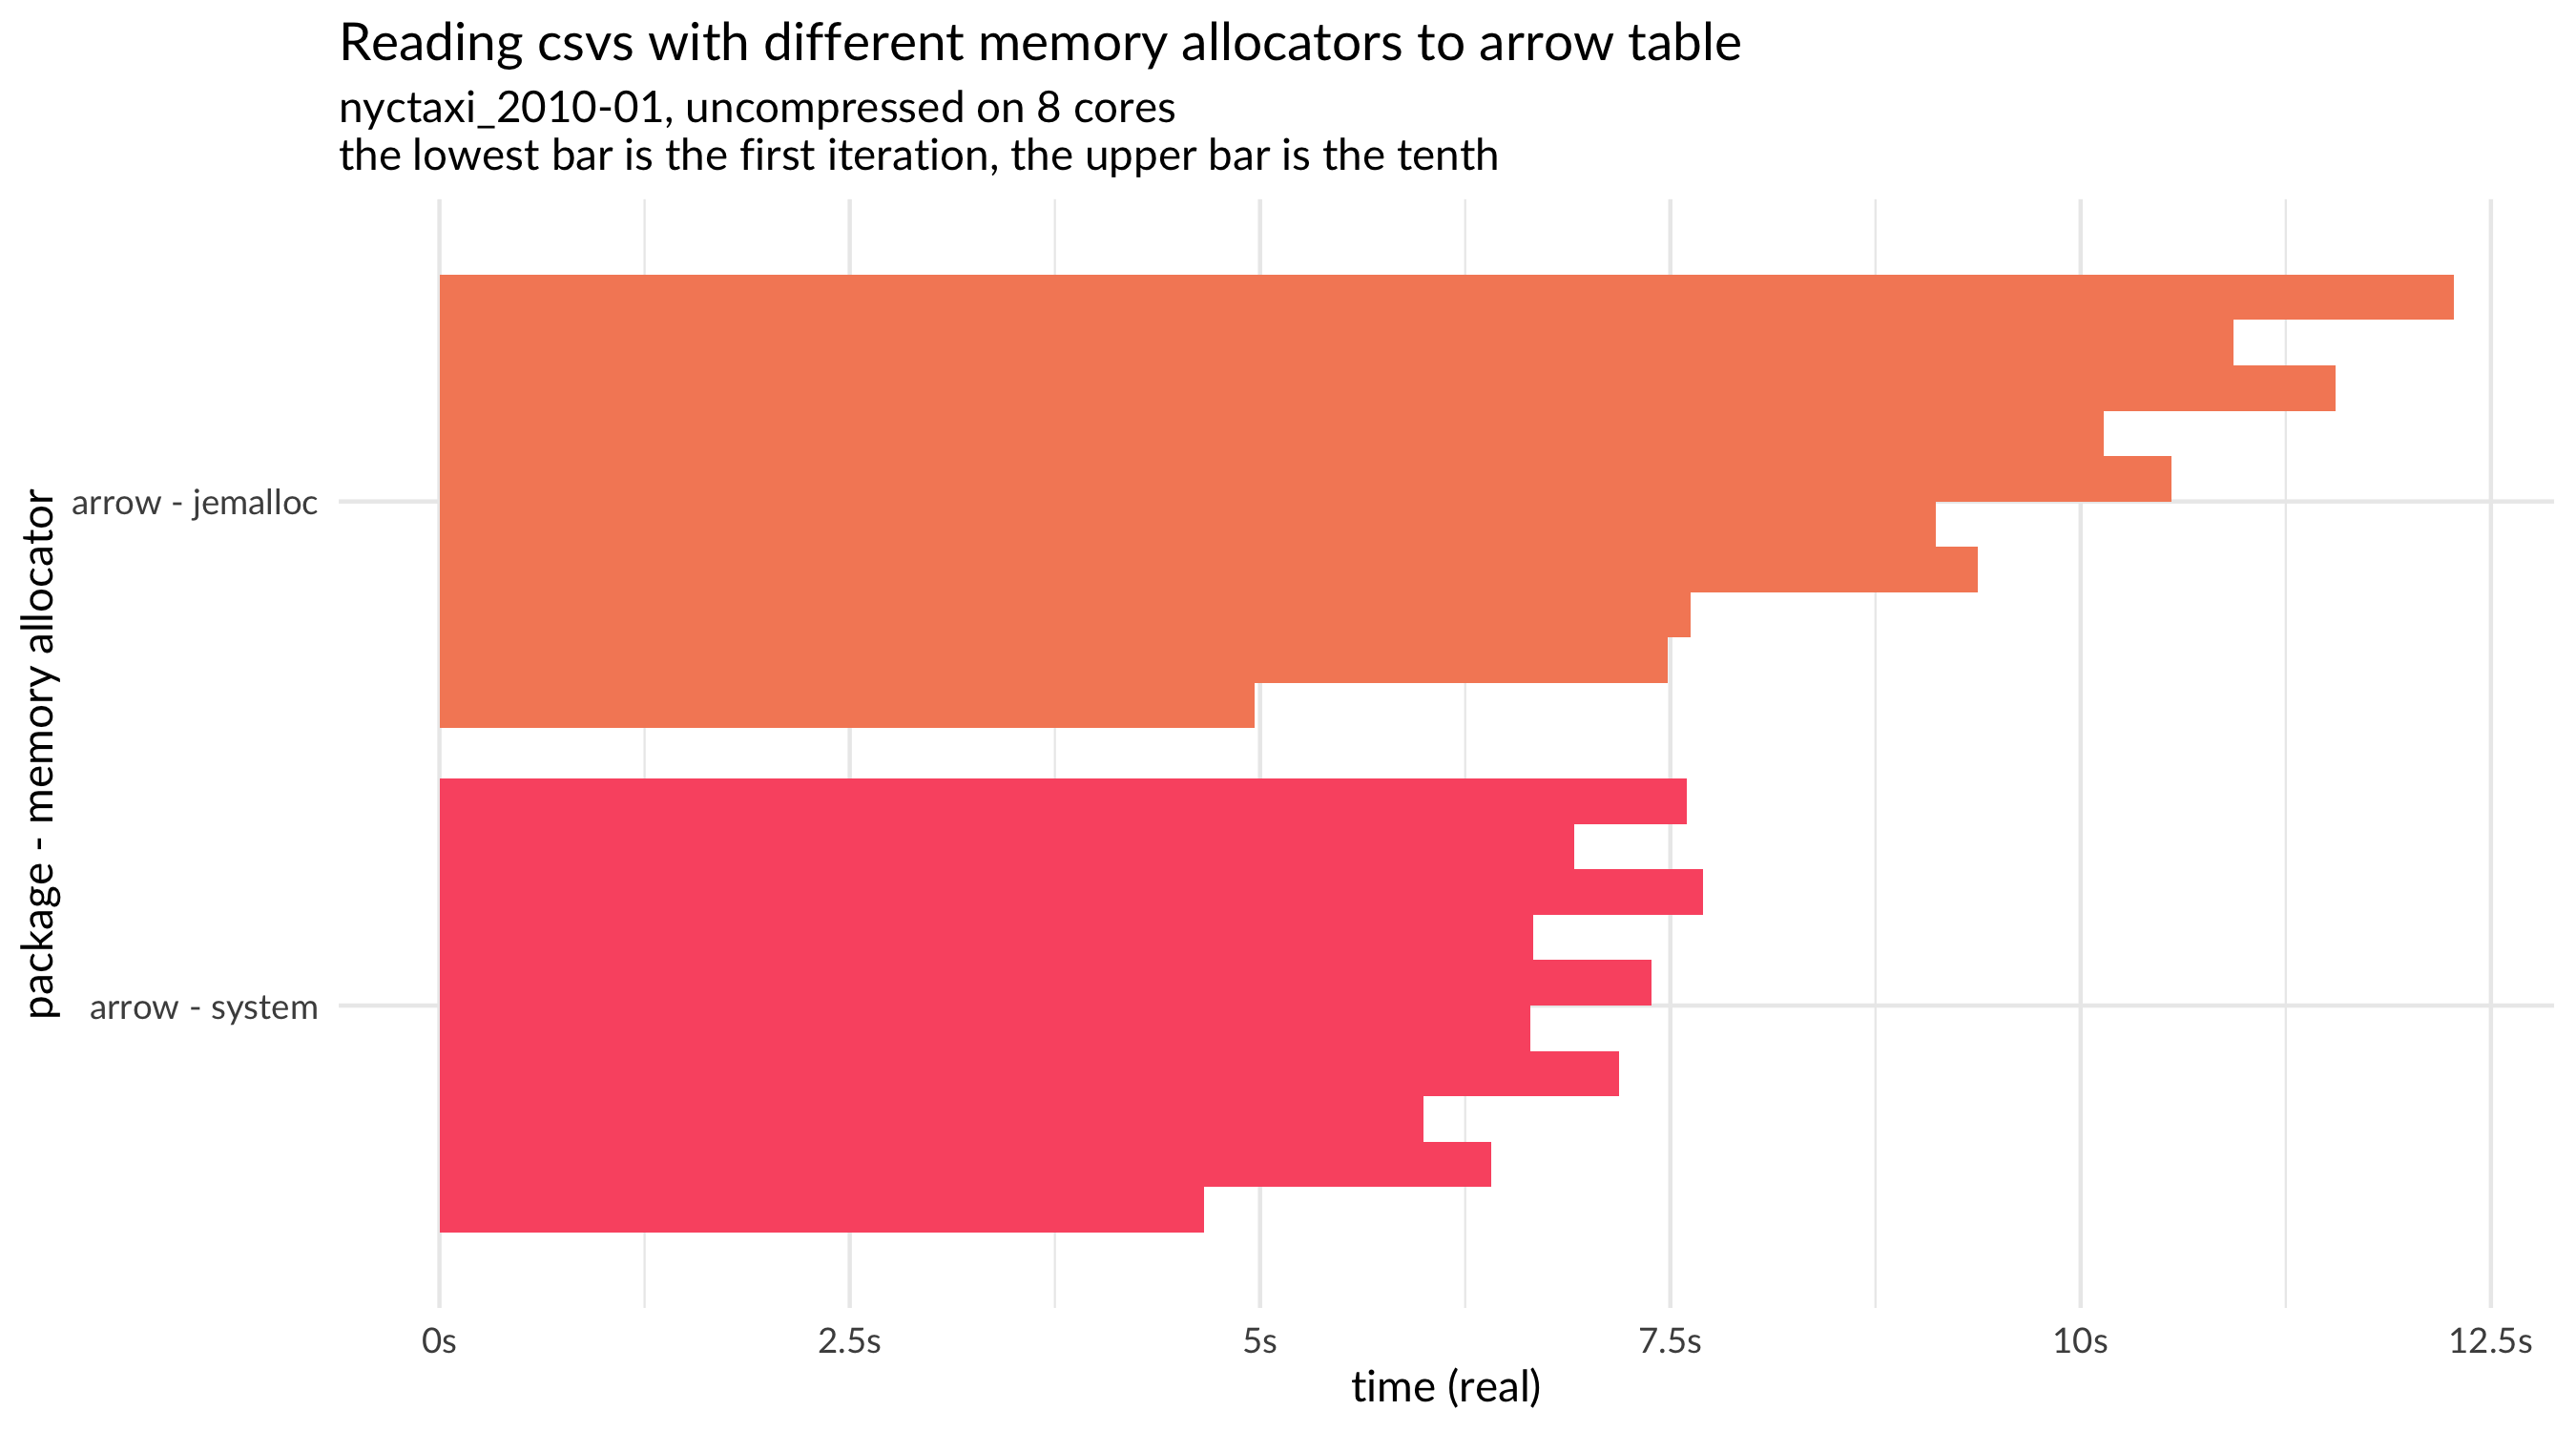 A bar chart showing differences between jemalloc and the system memory allocator when reading into an Arrow Table. Each has 10 iterations. Both allocators show a similar striking pattern increasing time on subsequent iterations. The system allocator is a bit faster than jemalloc. Dataset: uncompressed nyctaxi_2010-01 dataset with 8 cores